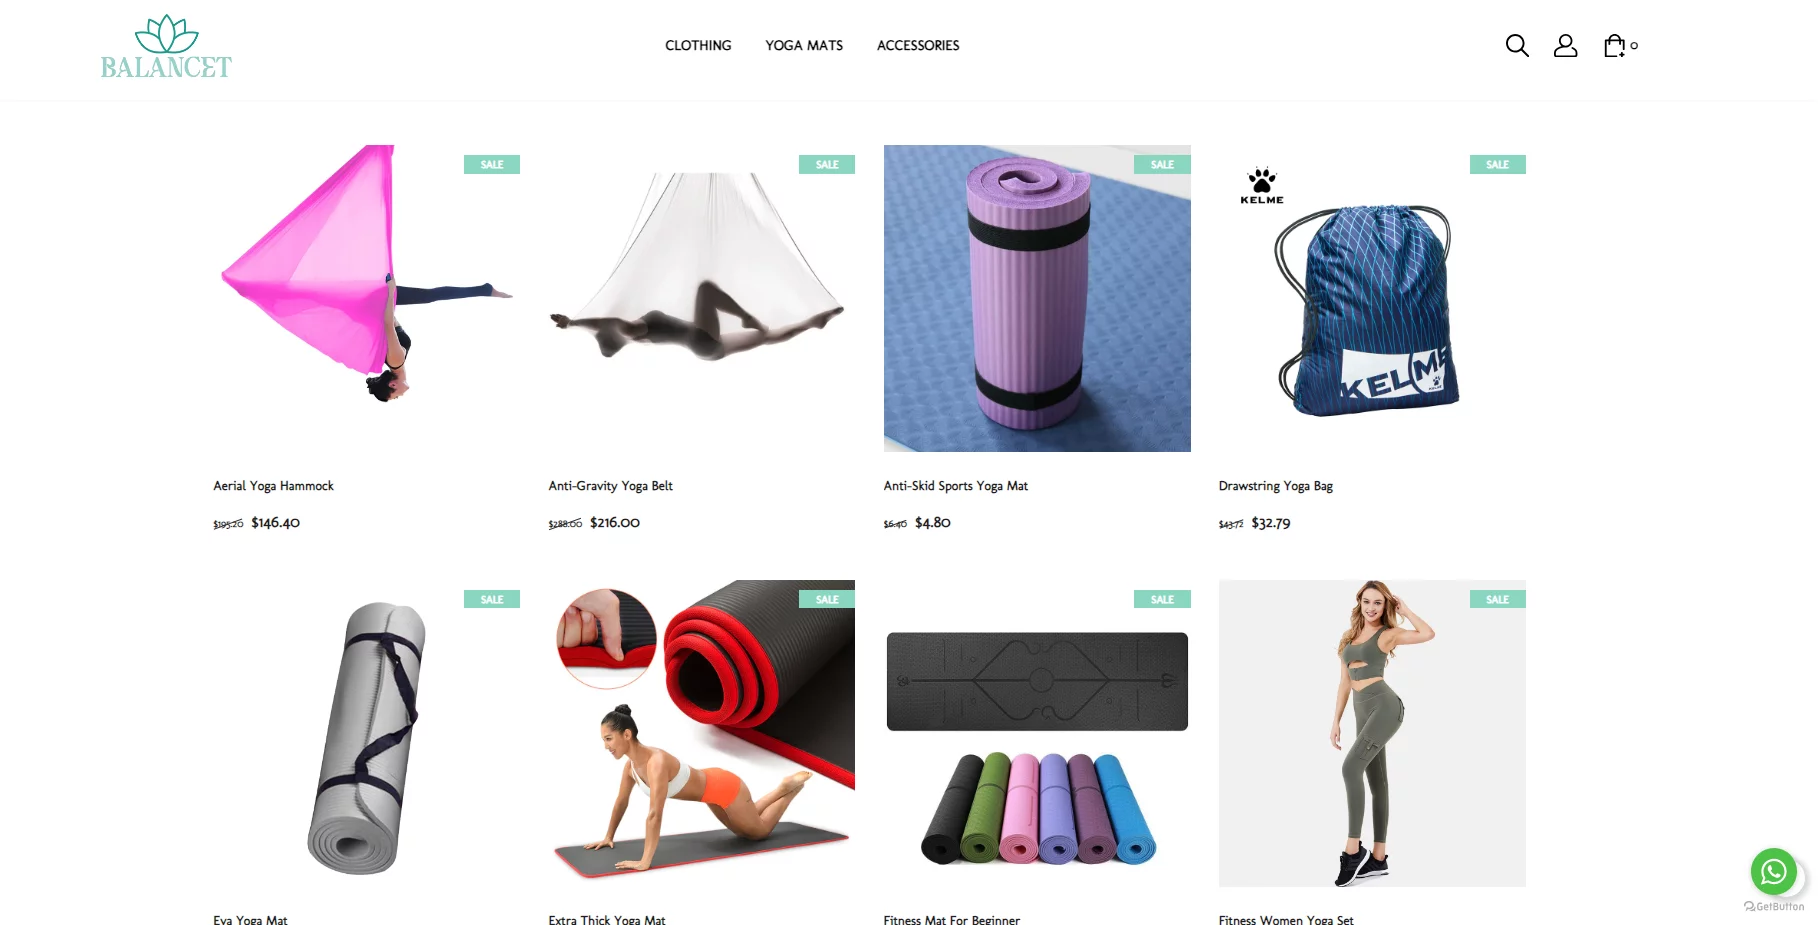 What are some winning products in the Yoga dropshipping business?